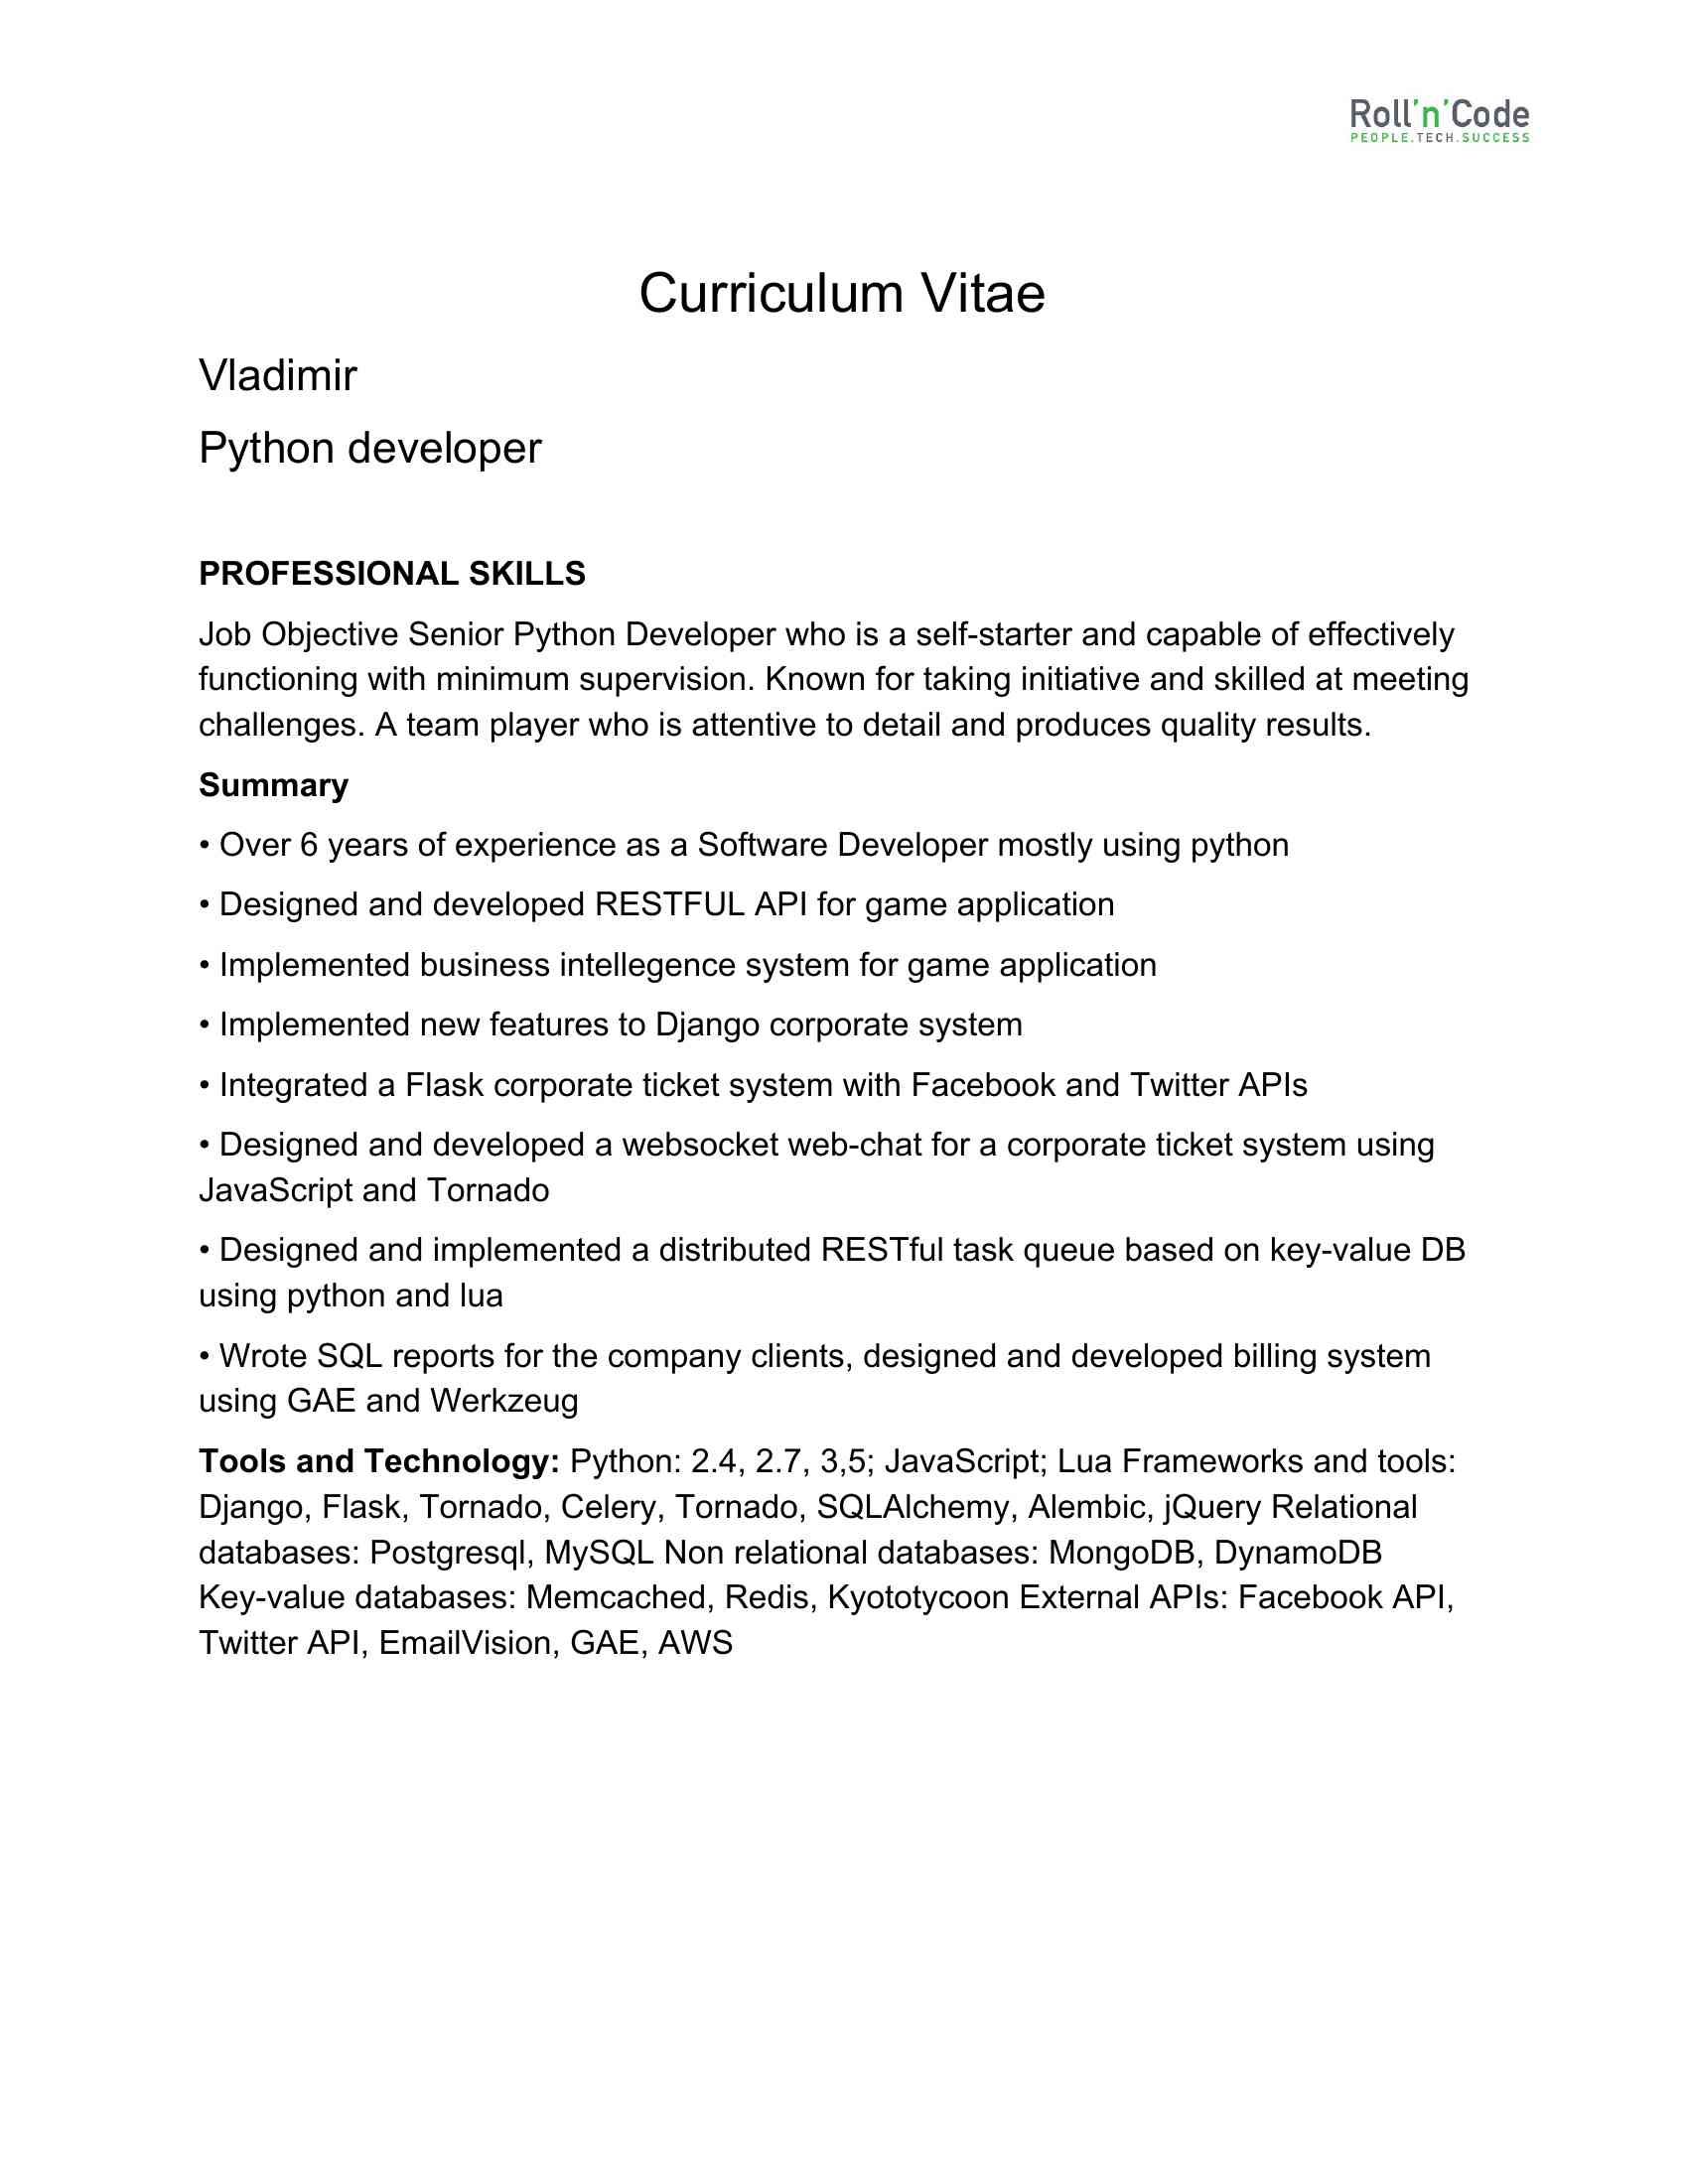  Curriculum Vitae <BR>Vladimir <BR>Python developer PROFESSIONAL SKILLS <BR>Job Objective Senior Python Developer who is a self-starter and capable of effectively <BR>functioning with minimum supervision. Known for taking initiative and skilled at meeting <BR>challenges. A team player who is attentive to detail and produces quality results. <BR>Summary <BR>• Over 6 years of experience as a Software Developer mostly using python <BR>• Designed and developed RESTFUL API for game application <BR>• Implemented business intellegence system for game application <BR>• Implemented new features to Django corporate system <BR>• Integrated a Flask corporate ticket system with Facebook and Twitter APIs <BR>• Designed and developed a websocket web-chat for a corporate ticket system using <BR>JavaScript and Tornado <BR>• Designed and implemented a distributed RESTful task queue based on key-value DB <BR>using python and lua <BR>• Wrote SQL reports for the company clients, designed and developed billing system <BR>using GAE and Werkzeug <BR>Tools and Technology:​ Python: 2.4, 2.7, 3,5; JavaScript; Lua Frameworks and tools: <BR>Django, Flask, Tornado, Celery, Tornado, SQLAlchemy, Alembic, jQuery Relational <BR>databases: Postgresql, MySQL Non relational databases: MongoDB, DynamoDB <BR>Key-value databases: Memcached, Redis, Kyototycoon External APIs: Facebook API, <BR>Twitter API, EmailVision, GAE, AWS Experience Project:​ ​Mimu <BR>Description:​ Mobile and Web Startup for Restaurants industry, <BR>that develops efficient ordering for customers and orders management for a staff. <BR>Date:​ 2018 - present <BR>Position:​ Main Python Developer <BR>Responsibilities:​ System architect, developing, code revise <BR>Tools and technologies: ​Django, Django REST, Postgresql, Facebook API, Google <BR>API Project: BSID <BR>Description: ​Python Django CRM that includes content distribution network and web <BR>administration portal for big USA non-profit organization. <BR>Development of front-end tool for management of different sub organizations and user <BR>flows, as well as development of backend structure and API for distributed servers. <BR>The system will support hundreds of users and organizations as well as numerous <BR>servers in different countries. <BR>Date:​ 2(XXX) XXX-XXXX <BR>Position:​ Main Python Developer <BR>Responsibilities:​ System architect, developing, code revise <BR>Tools and technologies: ​Django, Postgresql, Celery, Django REST Project: Scope ‘em <BR>Description:​ it is a dating application for mobile application. <BR>Date:​ 2017 <BR>Position:​ Main Python Developer <BR>Responsibilities: ​System architect, desing and implementation of RESTful API for <BR>mobile application, developing, code revise <BR>Tools and technologies: ​Django, Postgresql, Django RestFul February 2016 —December 2016 <BR>Position: ​Senior Python Developer <BR>Responsibilities: <BR>• support existing and developing games backend; <BR>• developing new features; <BR>Technologies: Python 3.5, Django, Celery, MySQL, Redis, MongDB, Memcached, <BR>AWS. January 2014 — December 2015 <BR>Position: ​Senior Python Developer <BR>Responsibilities: <BR>• support ticket system code; <BR>• developing new features; <BR>• integration of platform with social networks via API: Facebook, Twitter; <BR>• building integrated JavaScript webchat. <BR>Technologies: Python 2.7, JavaScript, Postgresql, Tornado, Werkzeug, Jinja2, <BR>WTForms, Redis, AWS, Memcached. December 2012 – December 2013 — ModnaKasta <BR>Position: ​Middle Python Developer <BR>Responsibilities: <BR>• support ecommerce webshop code; <BR>• developing new features; <BR>• writnig SQL reports <BR>• integration with EmailVision; <BR>• building banner system (Kyototycoon+LUA); <BR>• building a simple message queue, for emailing and SMS messaging <BR>(KyotoTycoon+LUA); <BR>• social networks integration. <BR>Technologies: Python 2.7, JavaScript, JQuery, LUA, Postgresql, Tornado, Django, Cassandra, KyotoTycoon, Redis, Memcached. September 2010 — November 2012 <BR>Position: ​Junior Python Developer <BR>Responsibilities: <BR>• support ticket system code; <BR>• developing new features; <BR>• building an internal billing system; <BR>• building an internal help site. <BR>Technologies: Python 2.4-2.7, JavaScript, JQuery, Zope2.9, Postgresql, Werkzeug + <BR>Jinja2 + WTForms + pyORM, Redis, Memcached. Education: <BR>2015 – current National Technical University of Ukraine 'Kyiv Polytechnic Institute' <BR>specialization: Artificial Intellegence degree: bachelor <BR>2002 – 2007 Zaporizhzhia National Technical University, machine-building department <BR>specialization: Aviation Engine Production degree: master <BR>English: ​technical – fluent; reading speech – average <BR>Ukrainian: Native <BR>Russian: Native <BR>